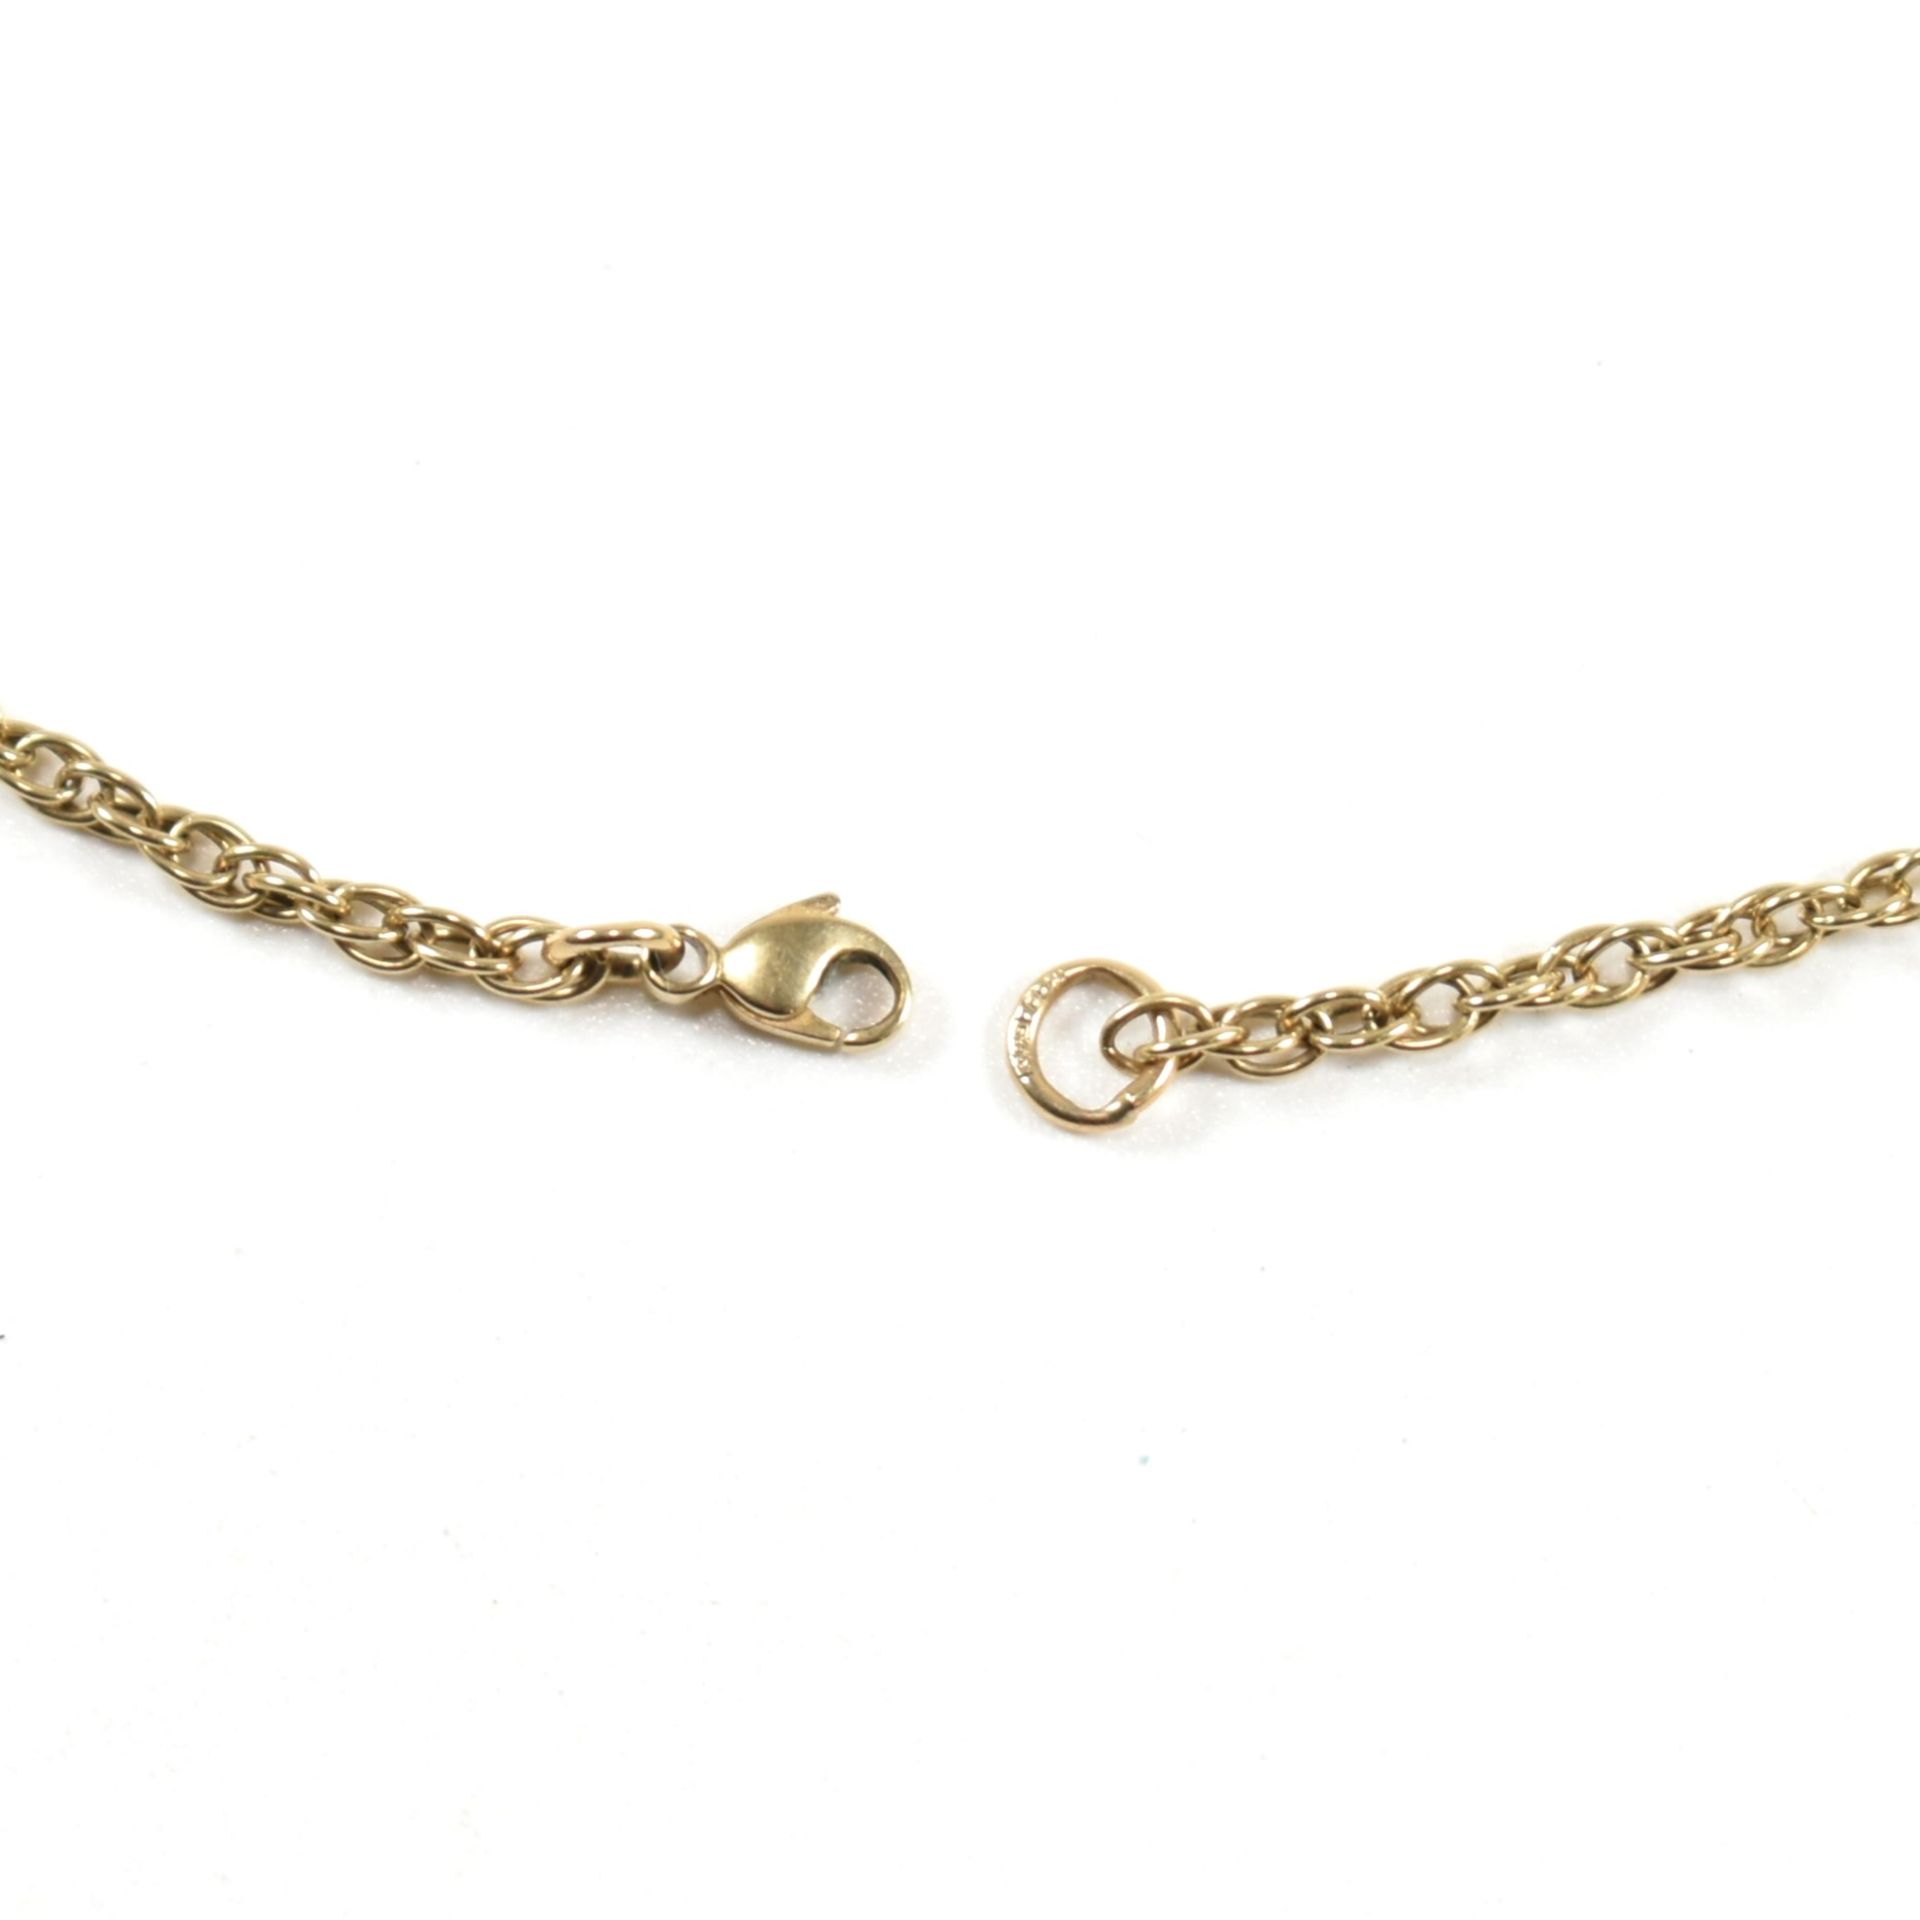 HALLMARKED 9CT GOLD T-BAR NECKLACE - Image 4 of 5